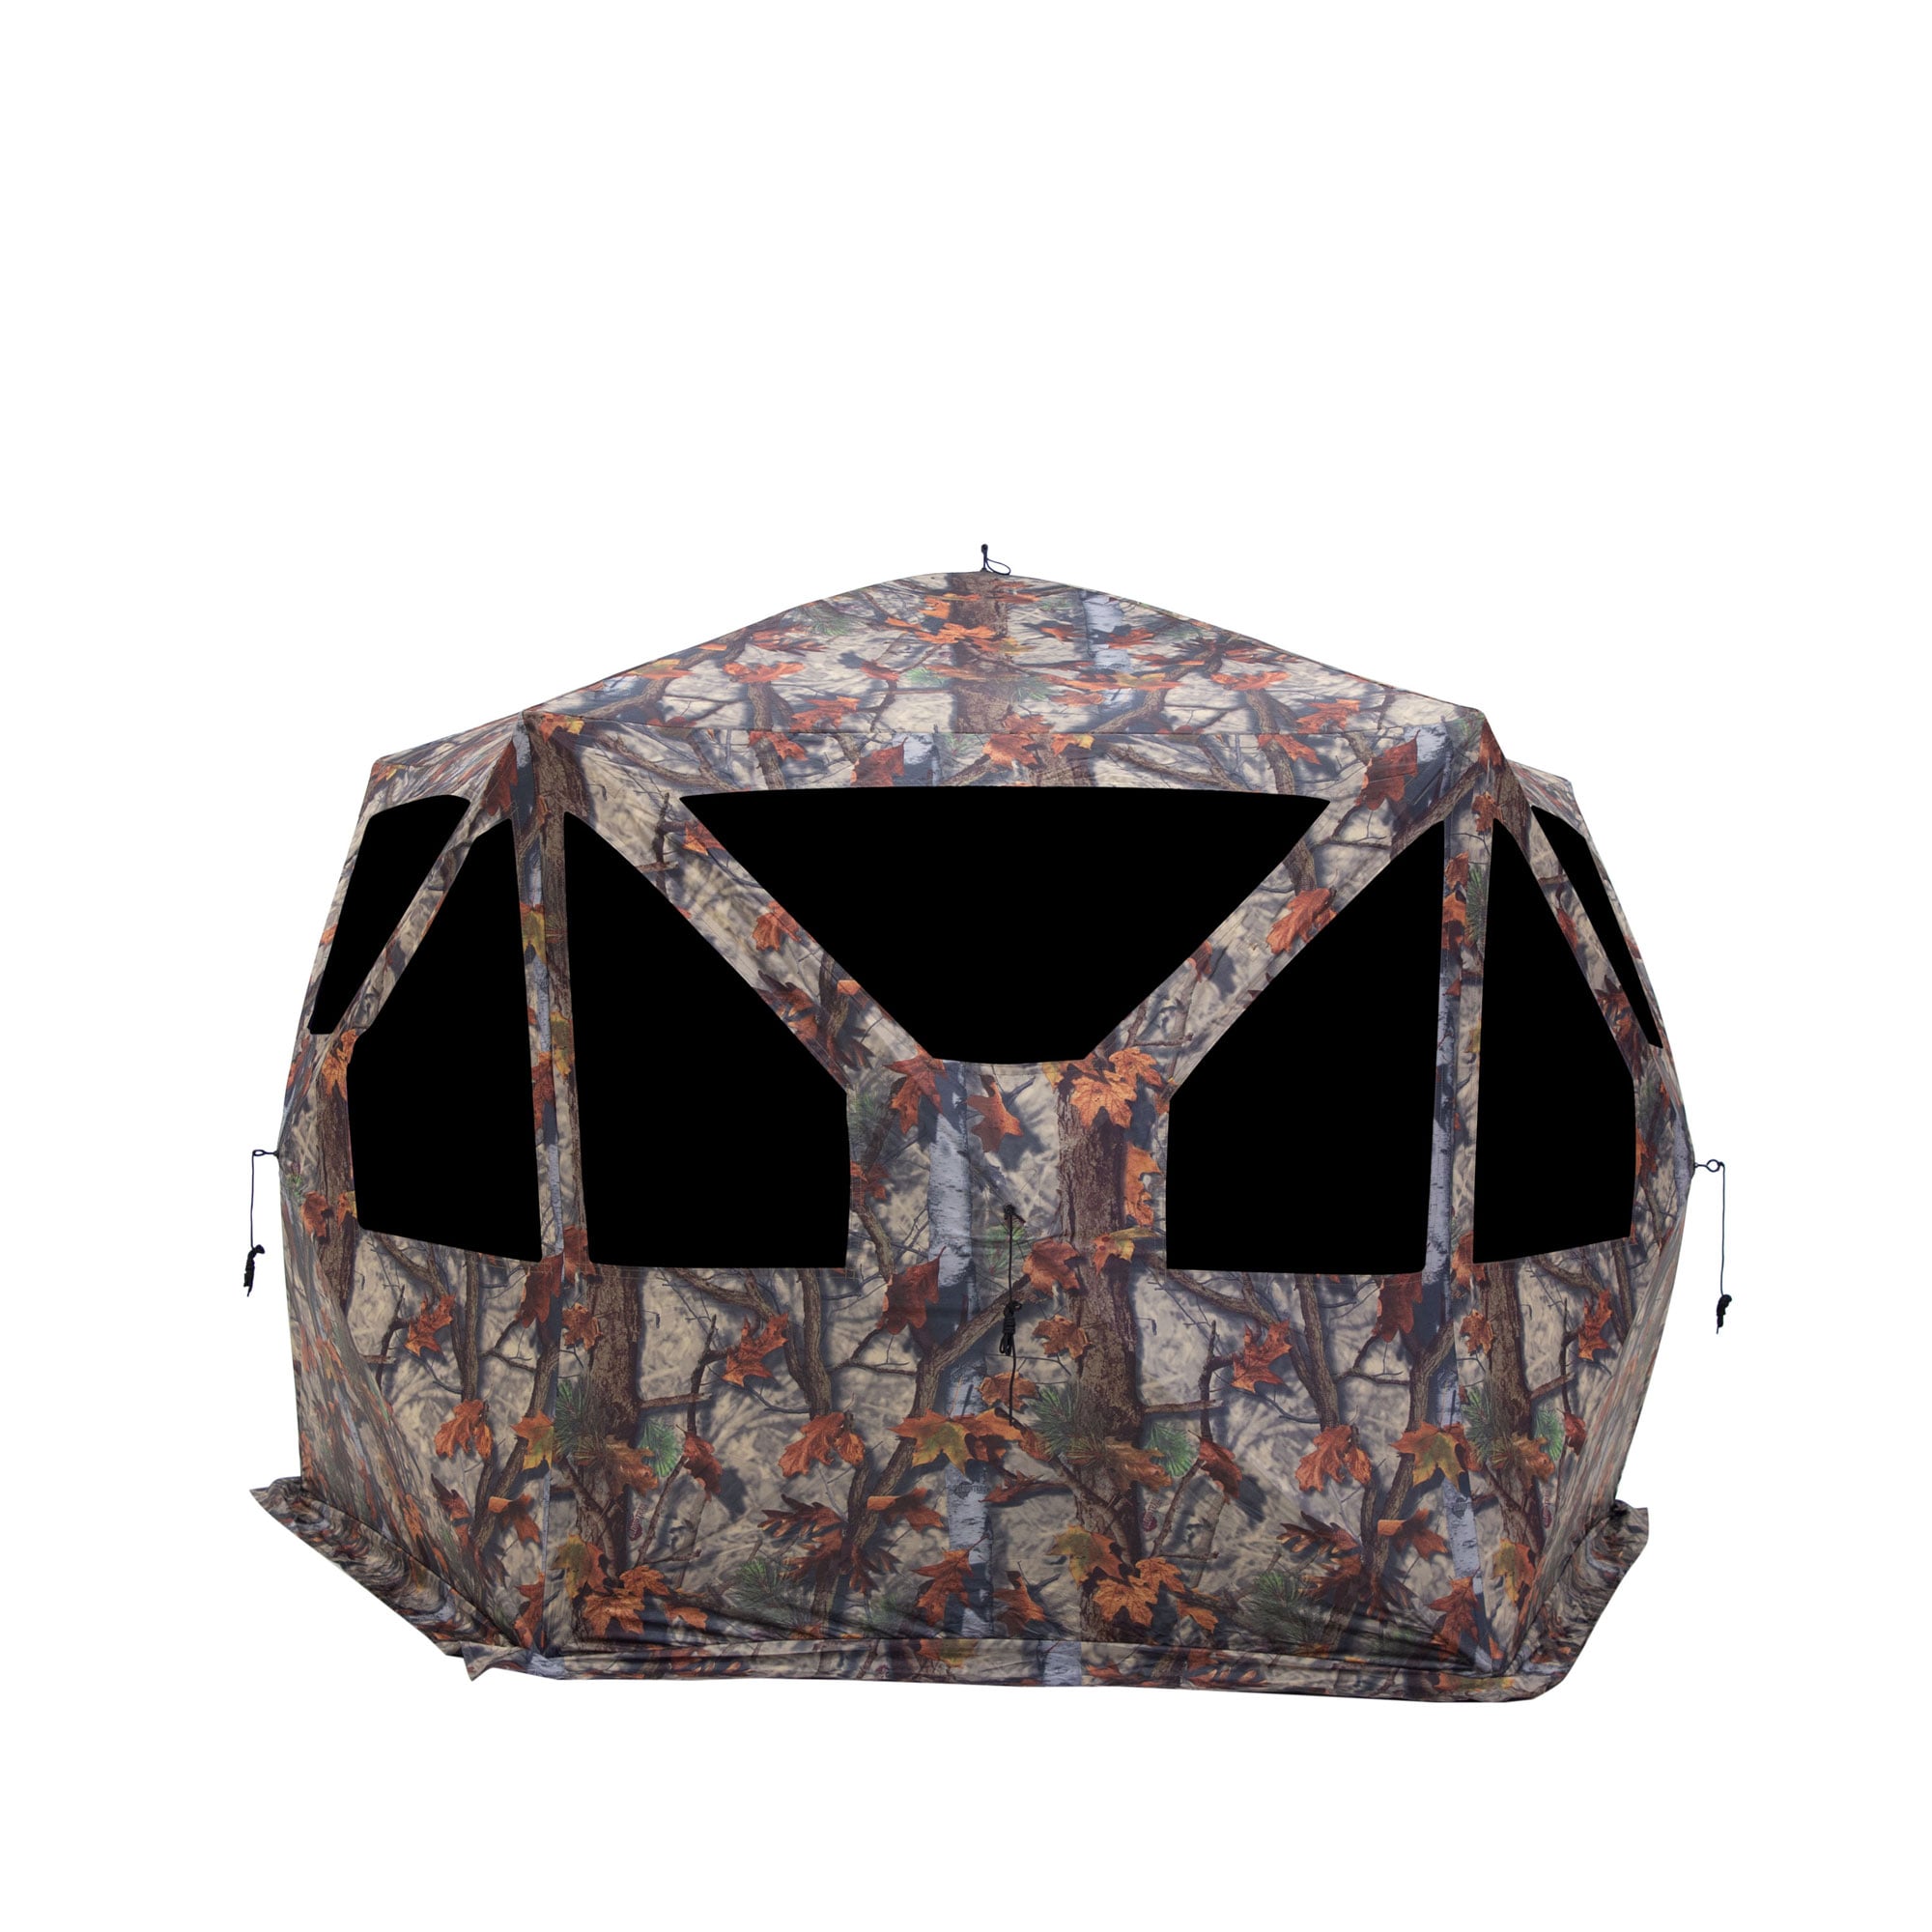 Ardisam Pentagon Large Ground Hunting Hub Blind in Blood Trail Camo in ...